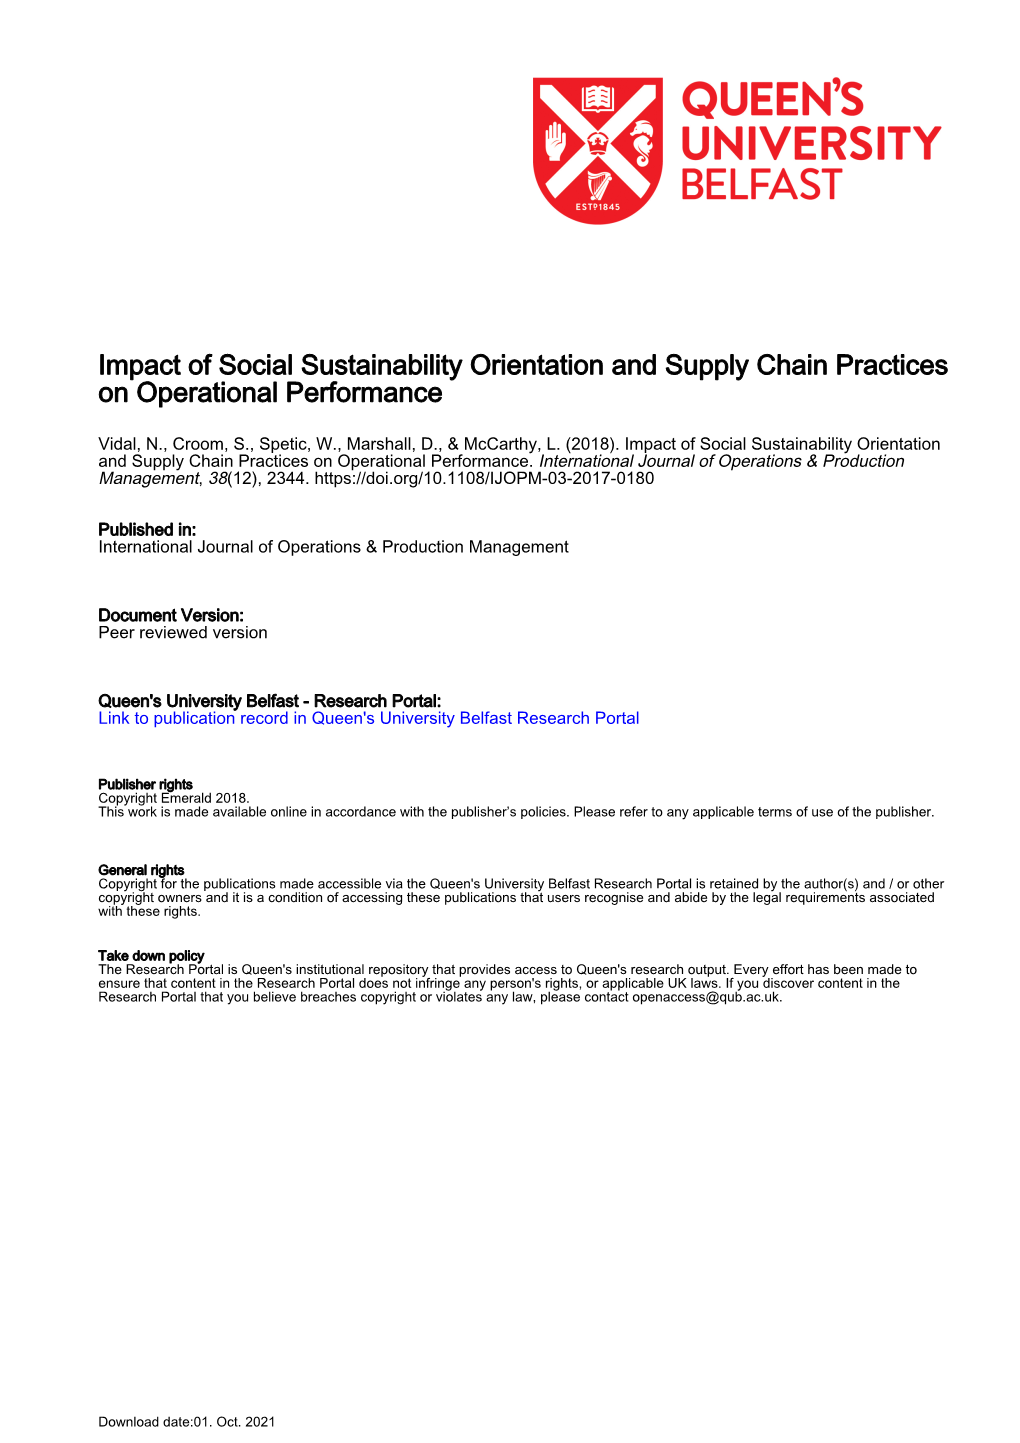 Impact of Social Sustainability Orientation and Supply Chain Practices on Operational Performance